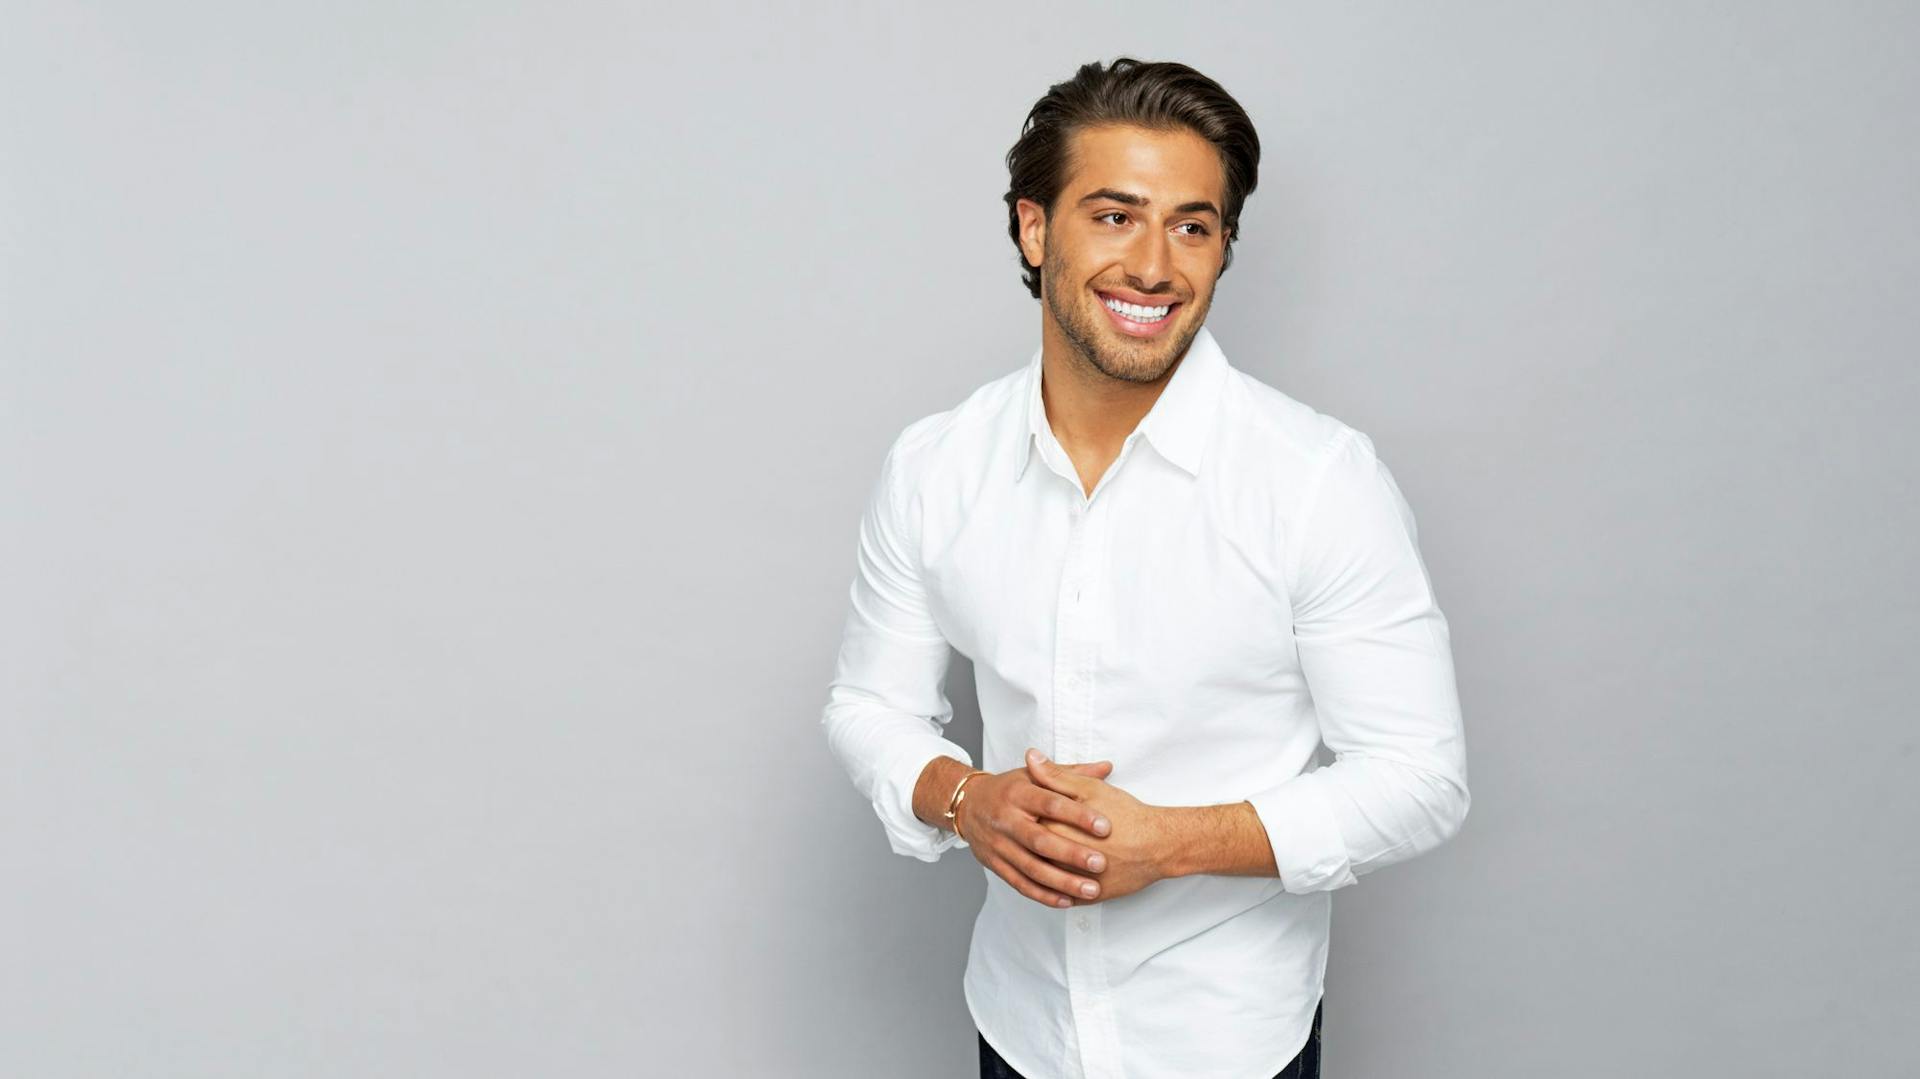 Kem Cetinay on PTSD, Anxiety, Depression and the Importance of Family